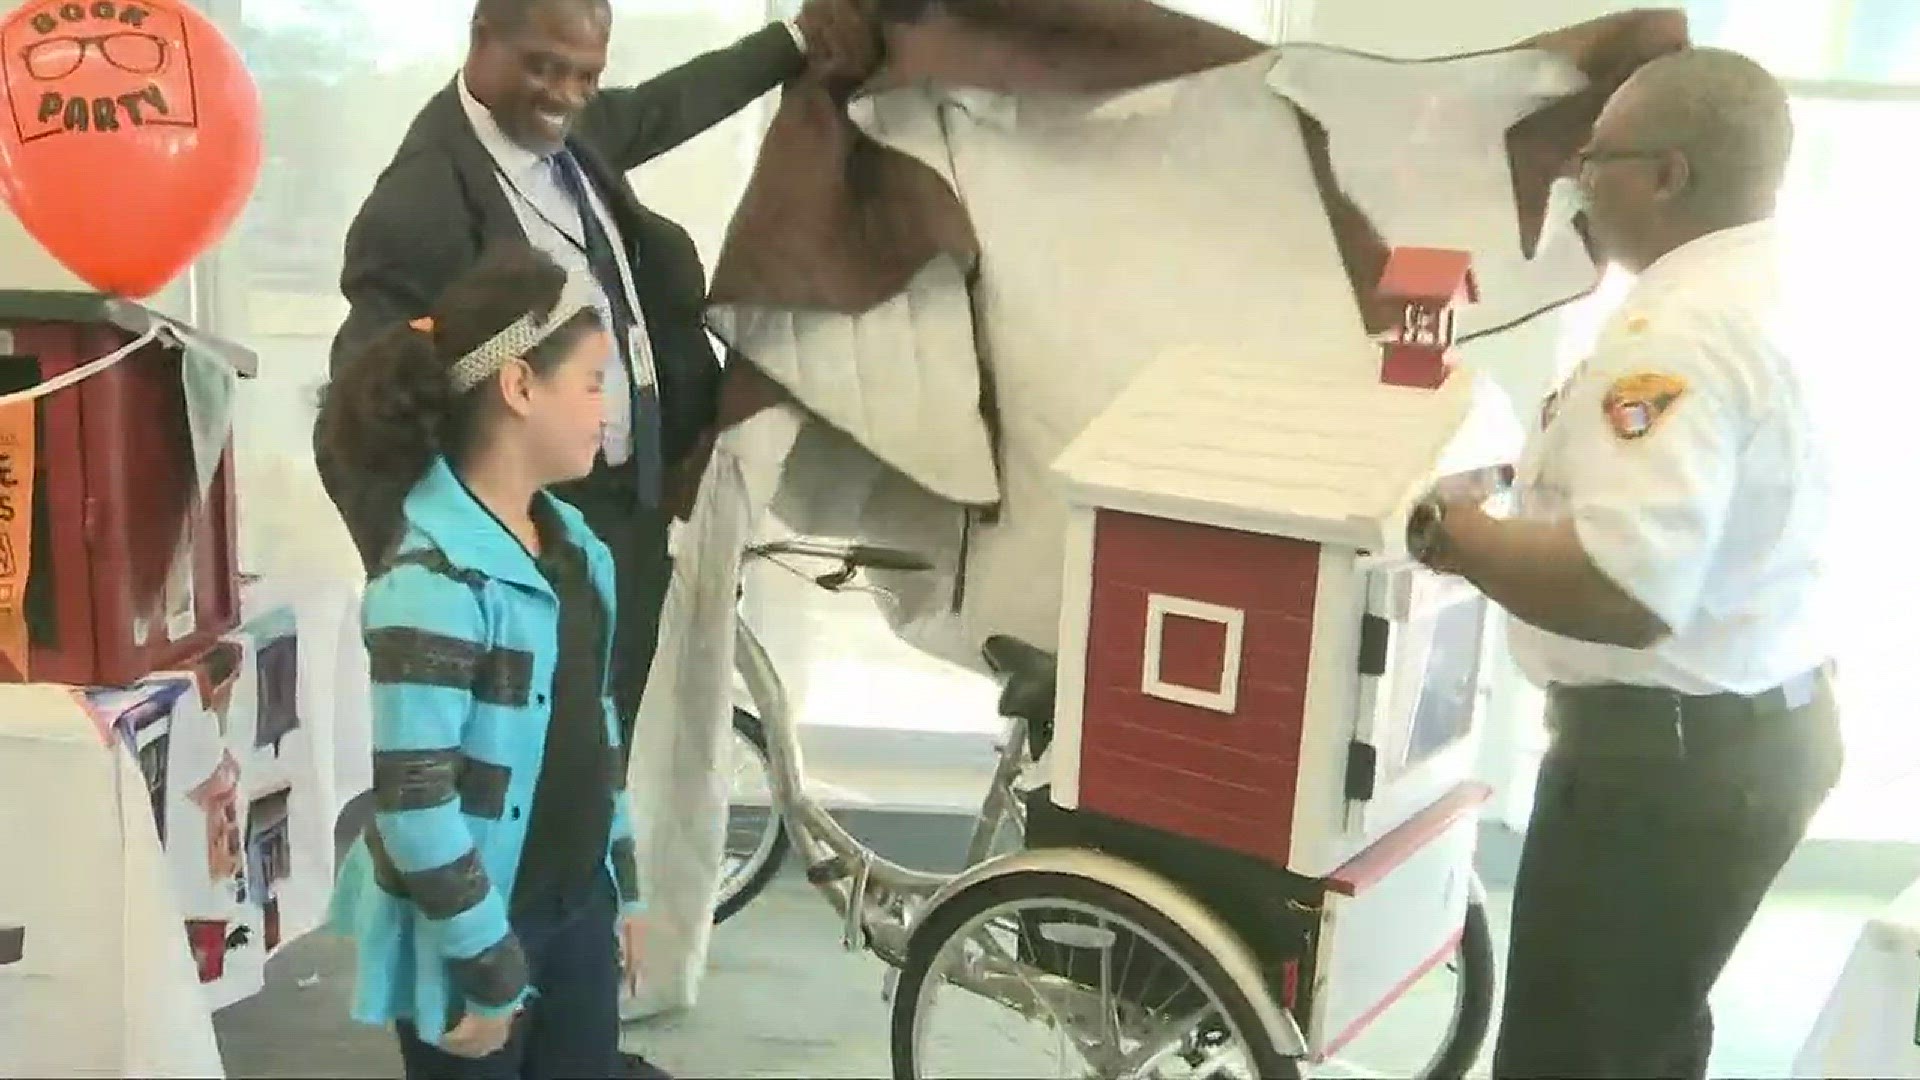 Cleveland Police help promote literacy with Little Free Libraries